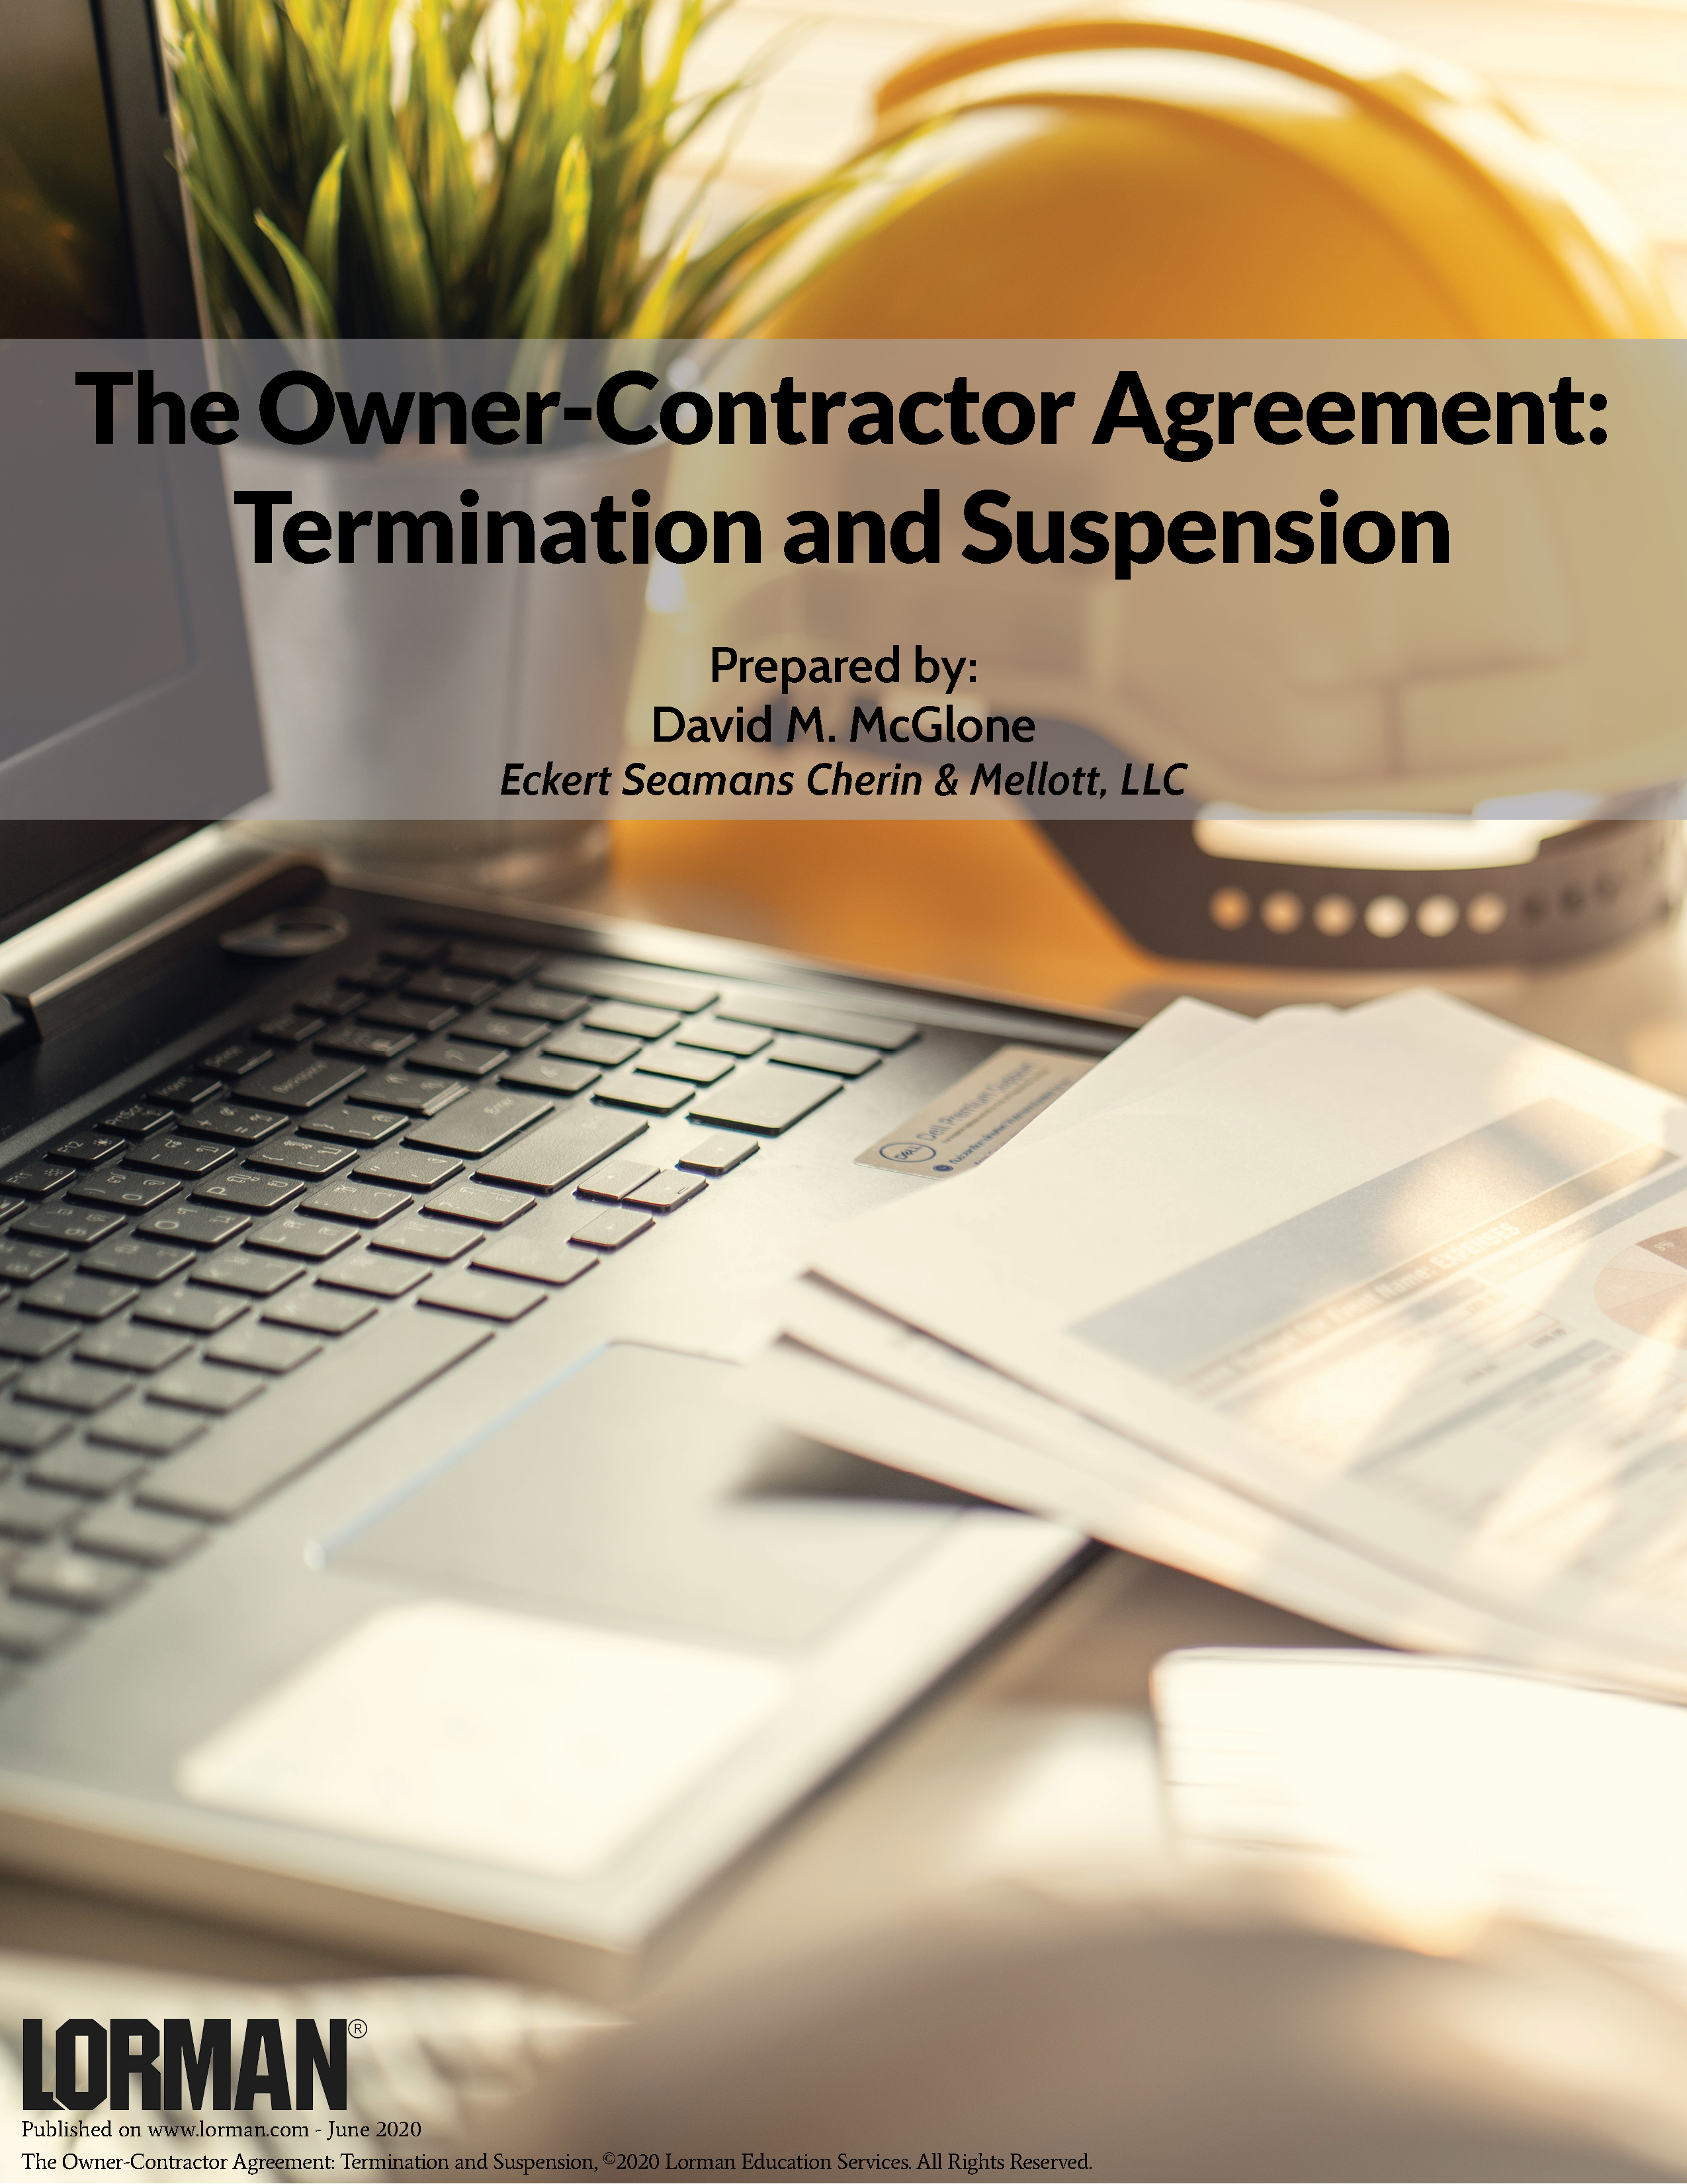 The Owner-Contractor Agreement: Termination and Suspension